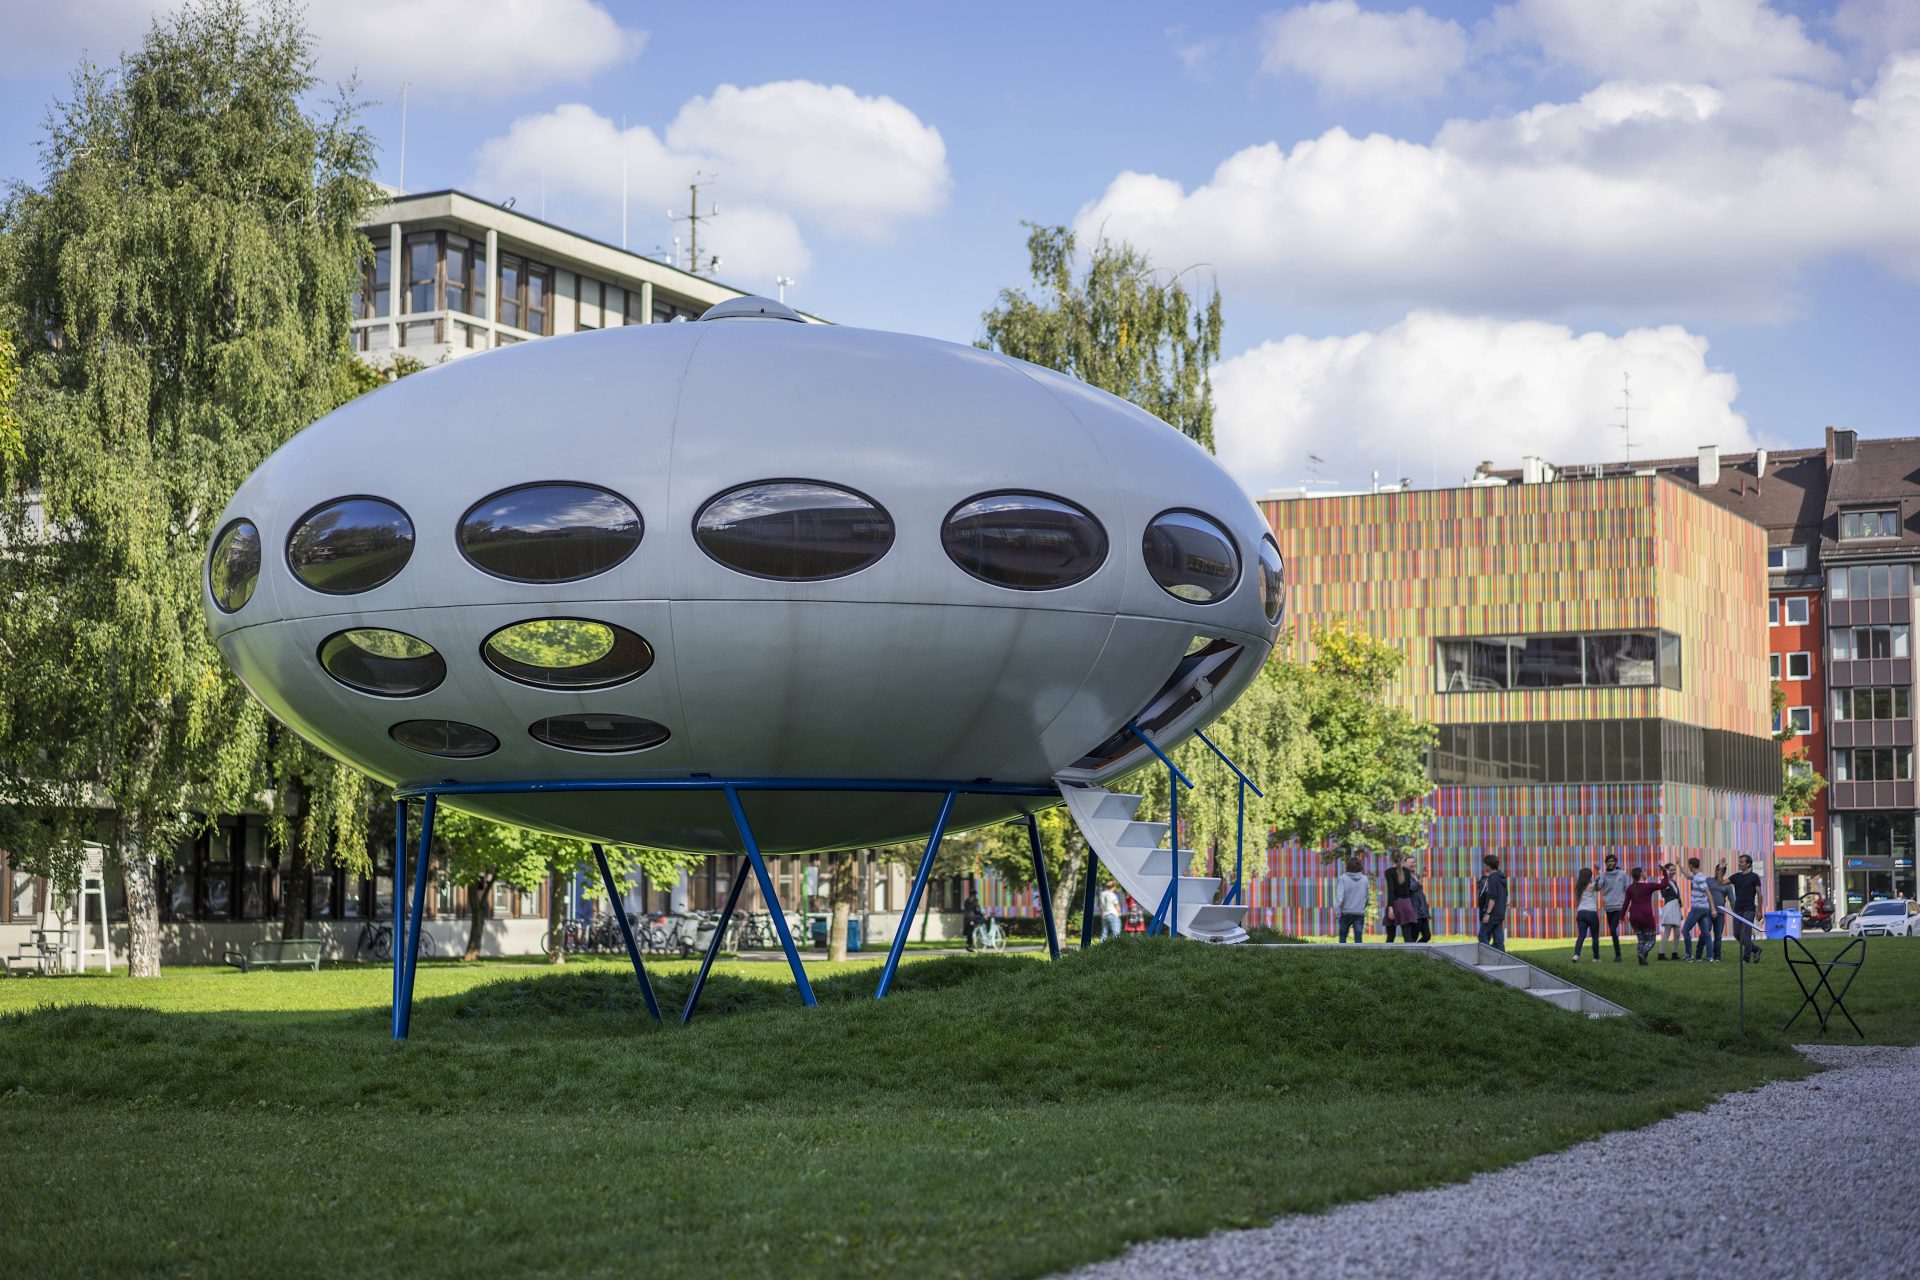 The picture shows the mobile home Futuro, which resembles a UFO. It stands on a meadow in front of the Pinakothek der Poderne. In the background you can see the square, colorful building of the Museum Brandhorst.